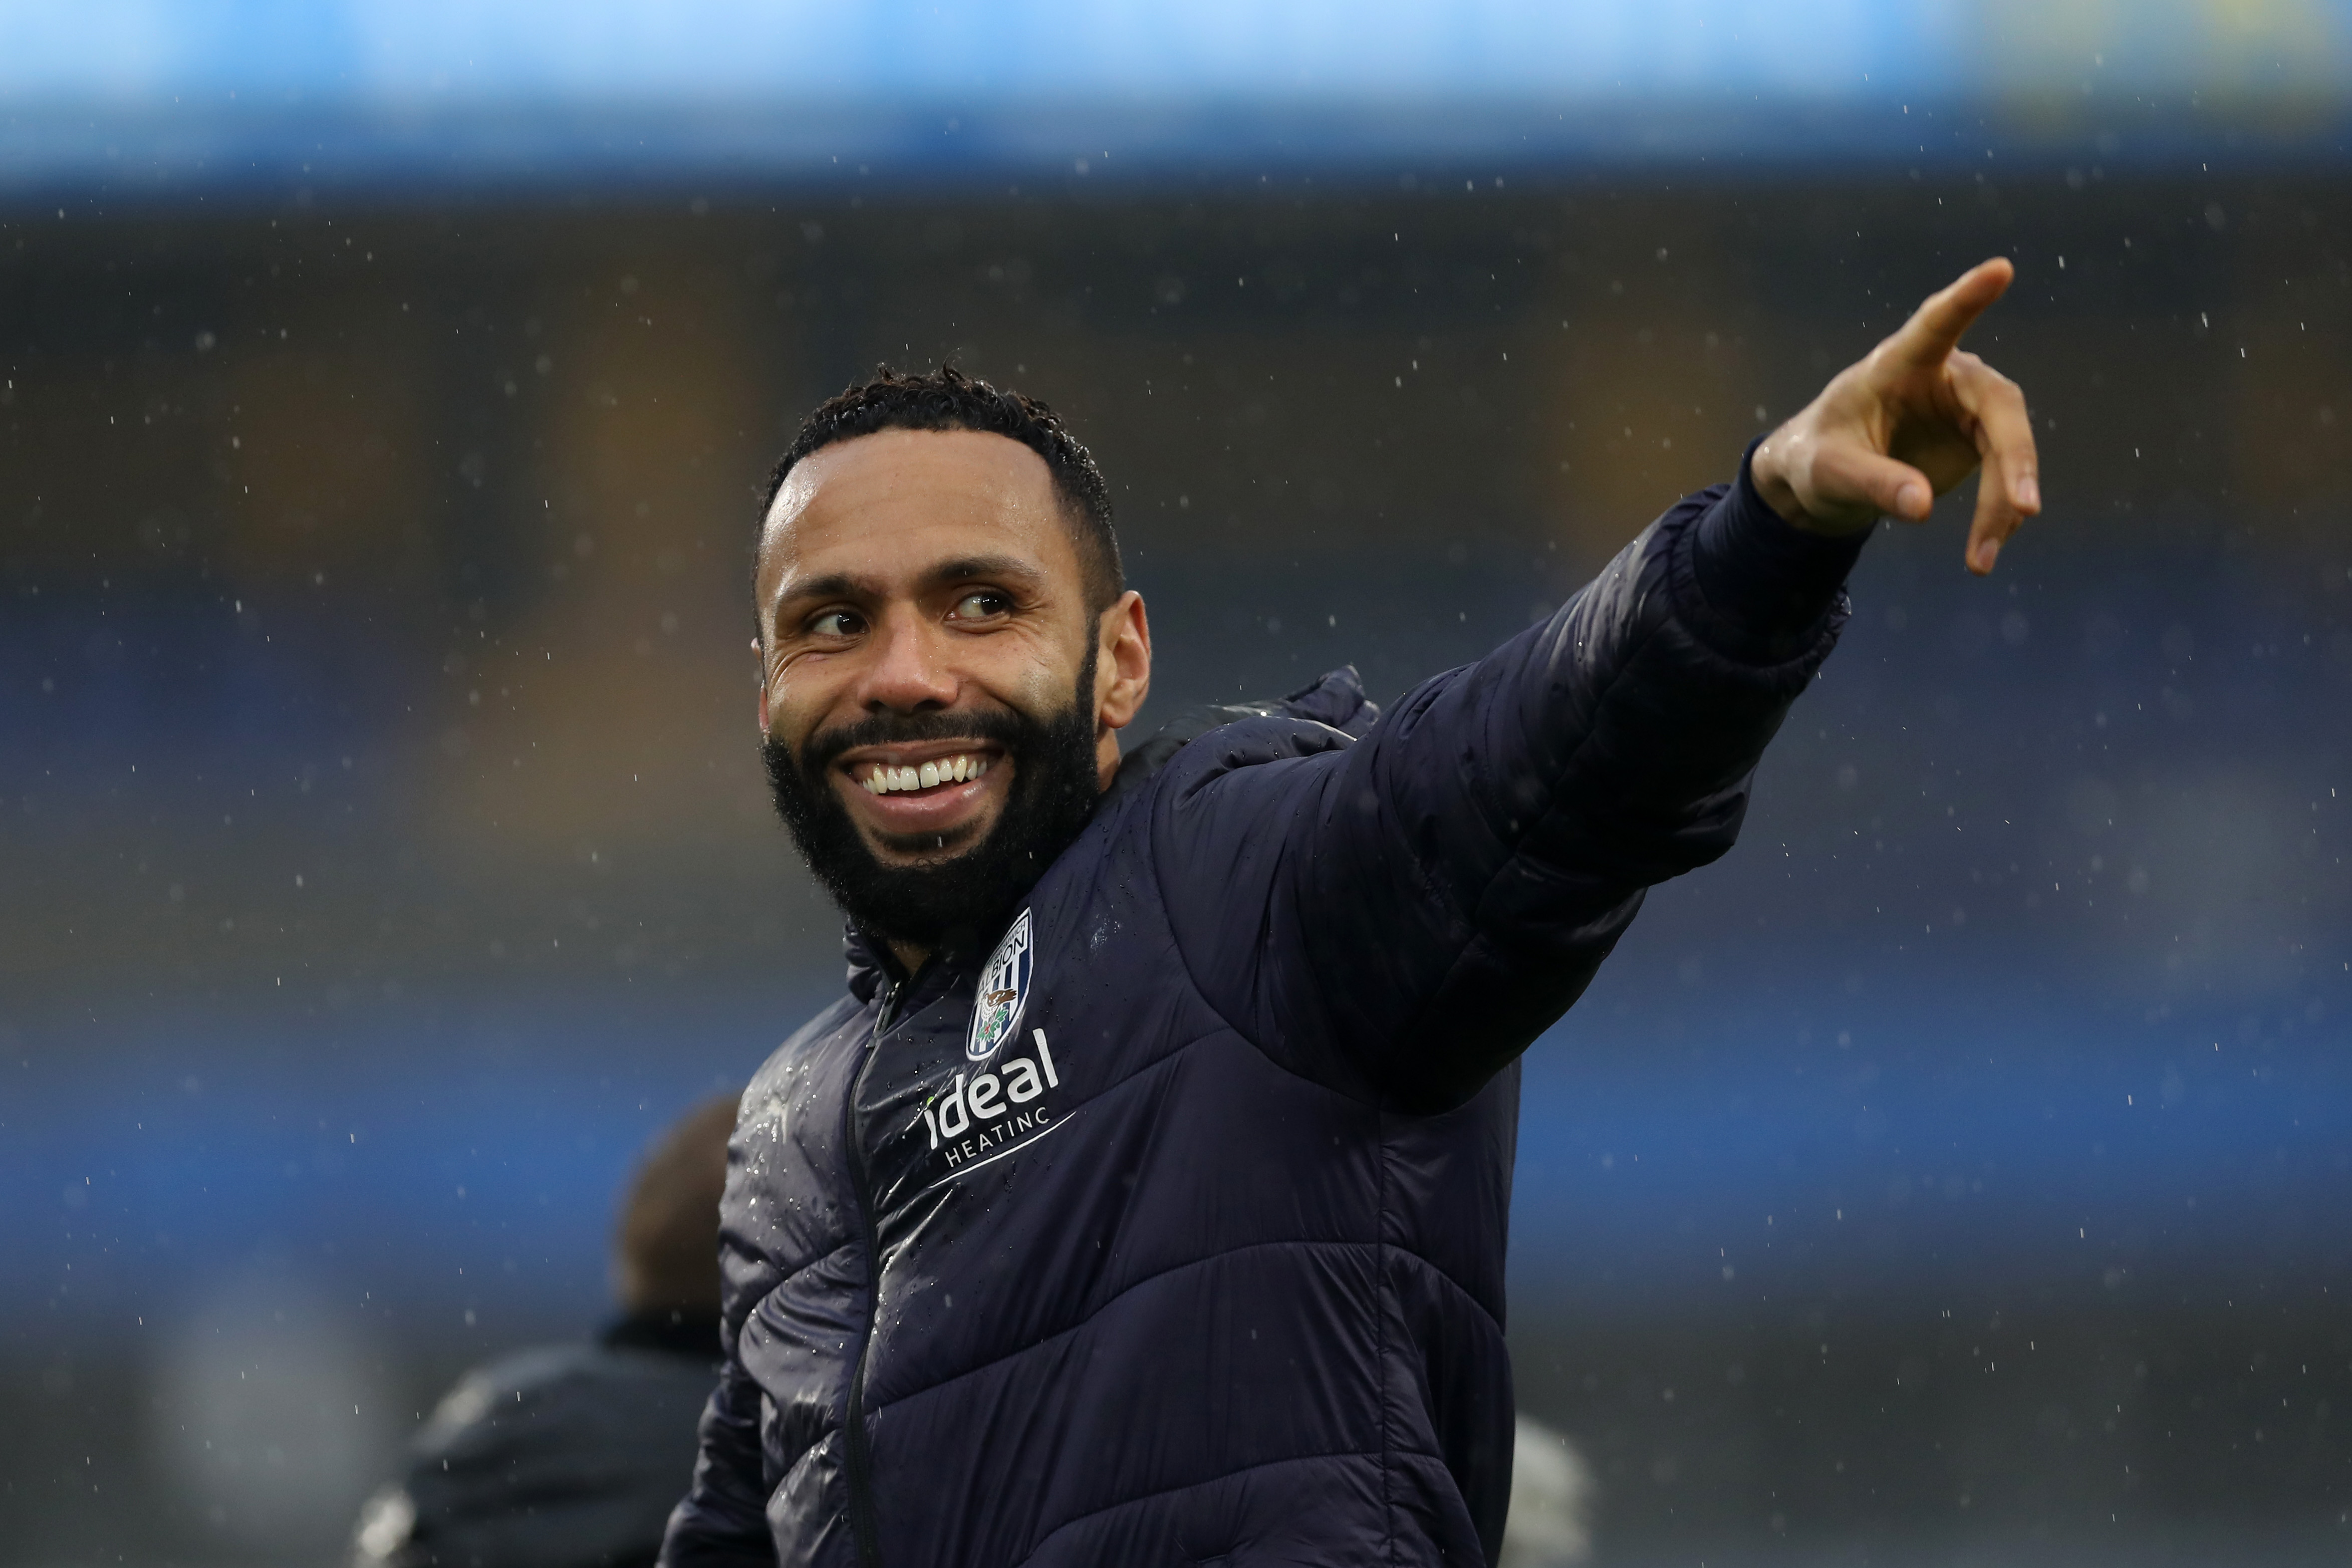 Kyle Bartley smiling and pointing while wearing an Albion coat